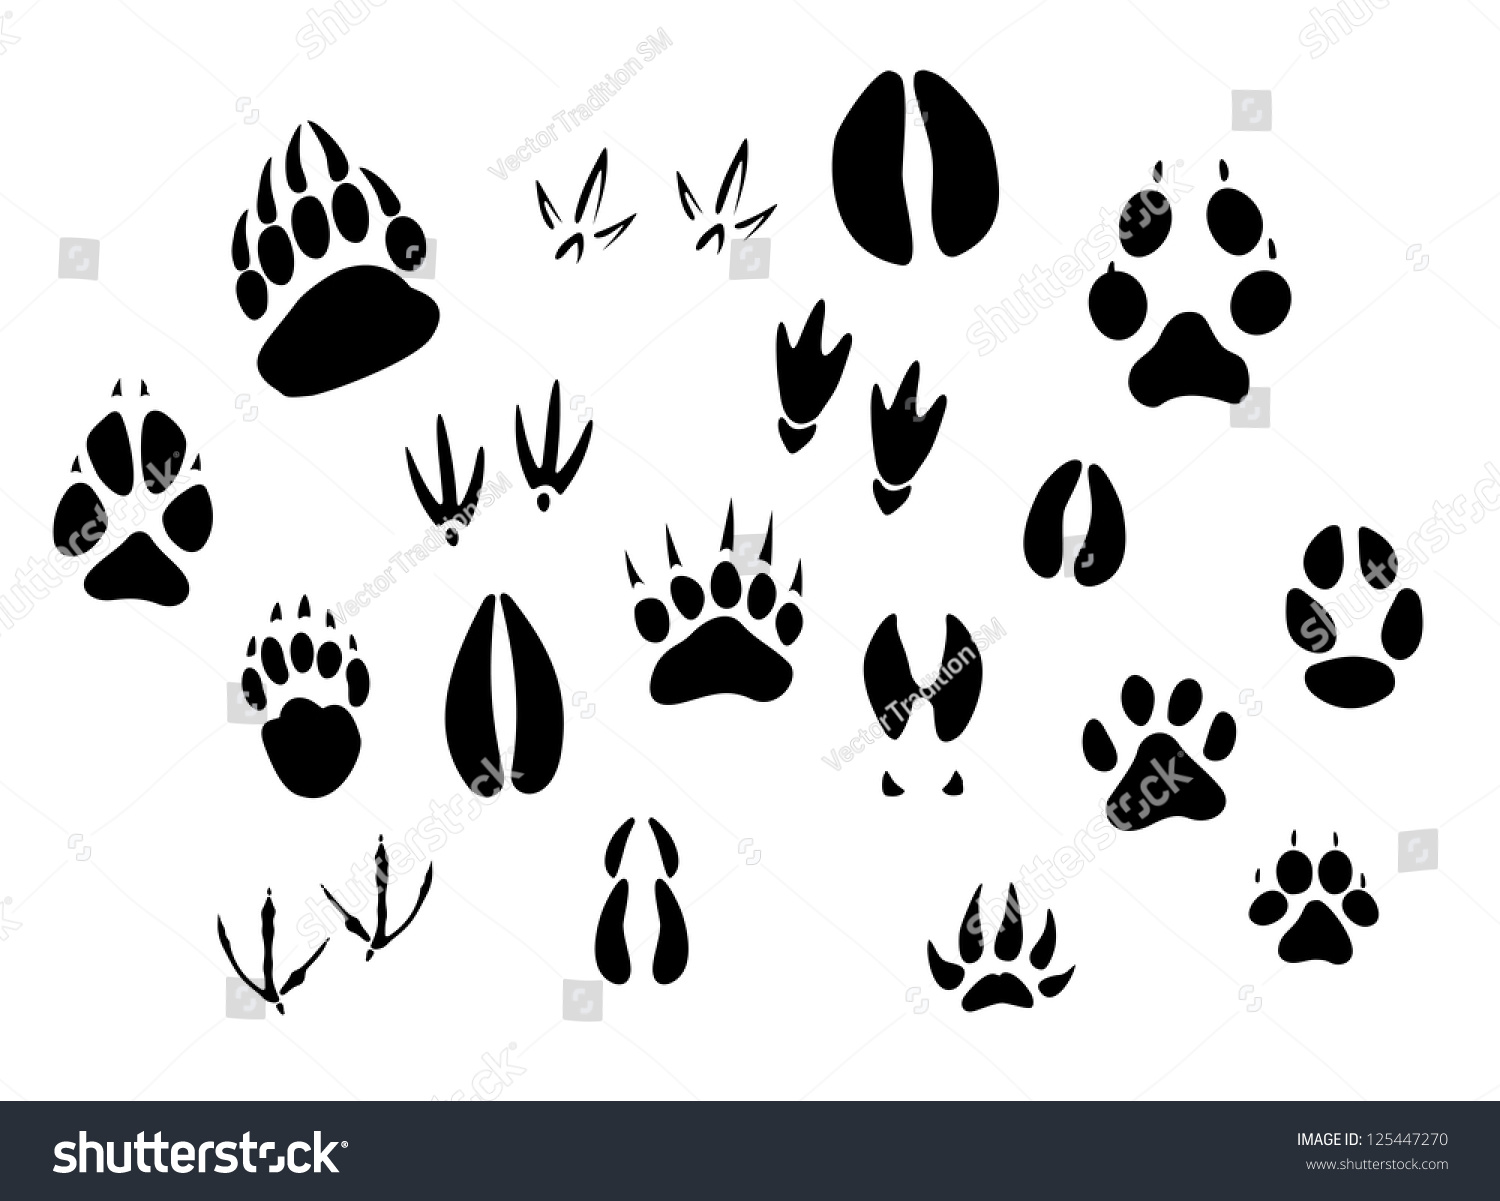 SVG of Animal - birds and mammals - footprints silhouettes set isolated on white background, such as idea of logo. Jpeg version also available in gallery svg